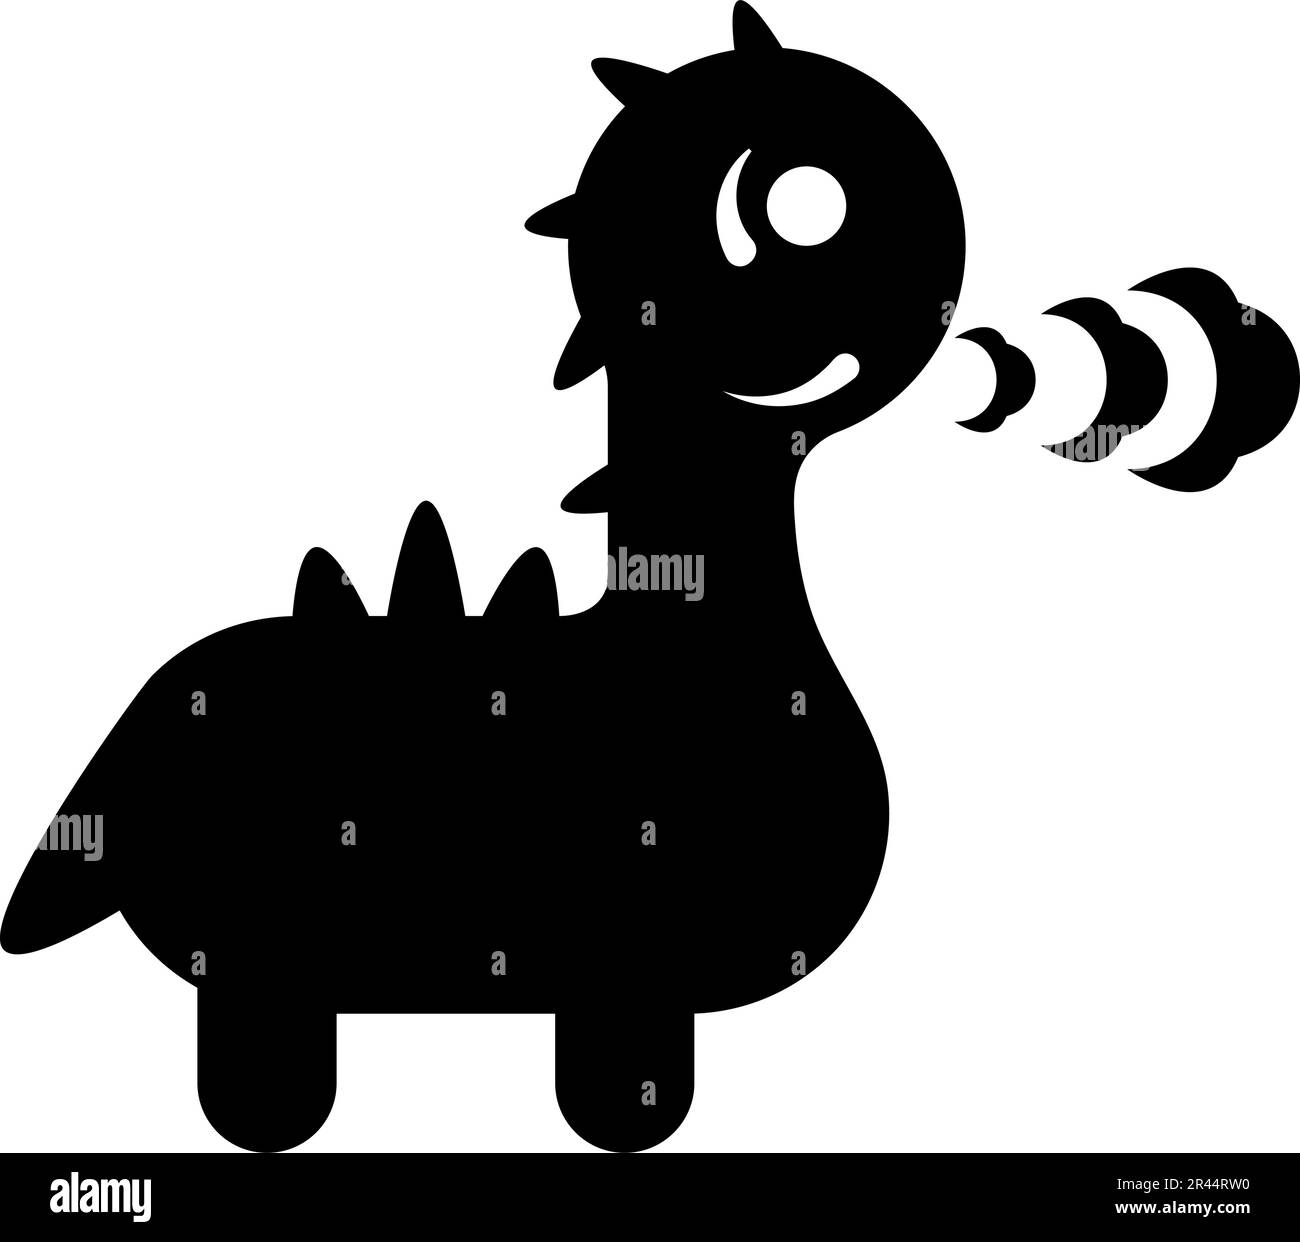 Cute dragon breathing fire icon black color vector illustration image flat style simple Stock Vector